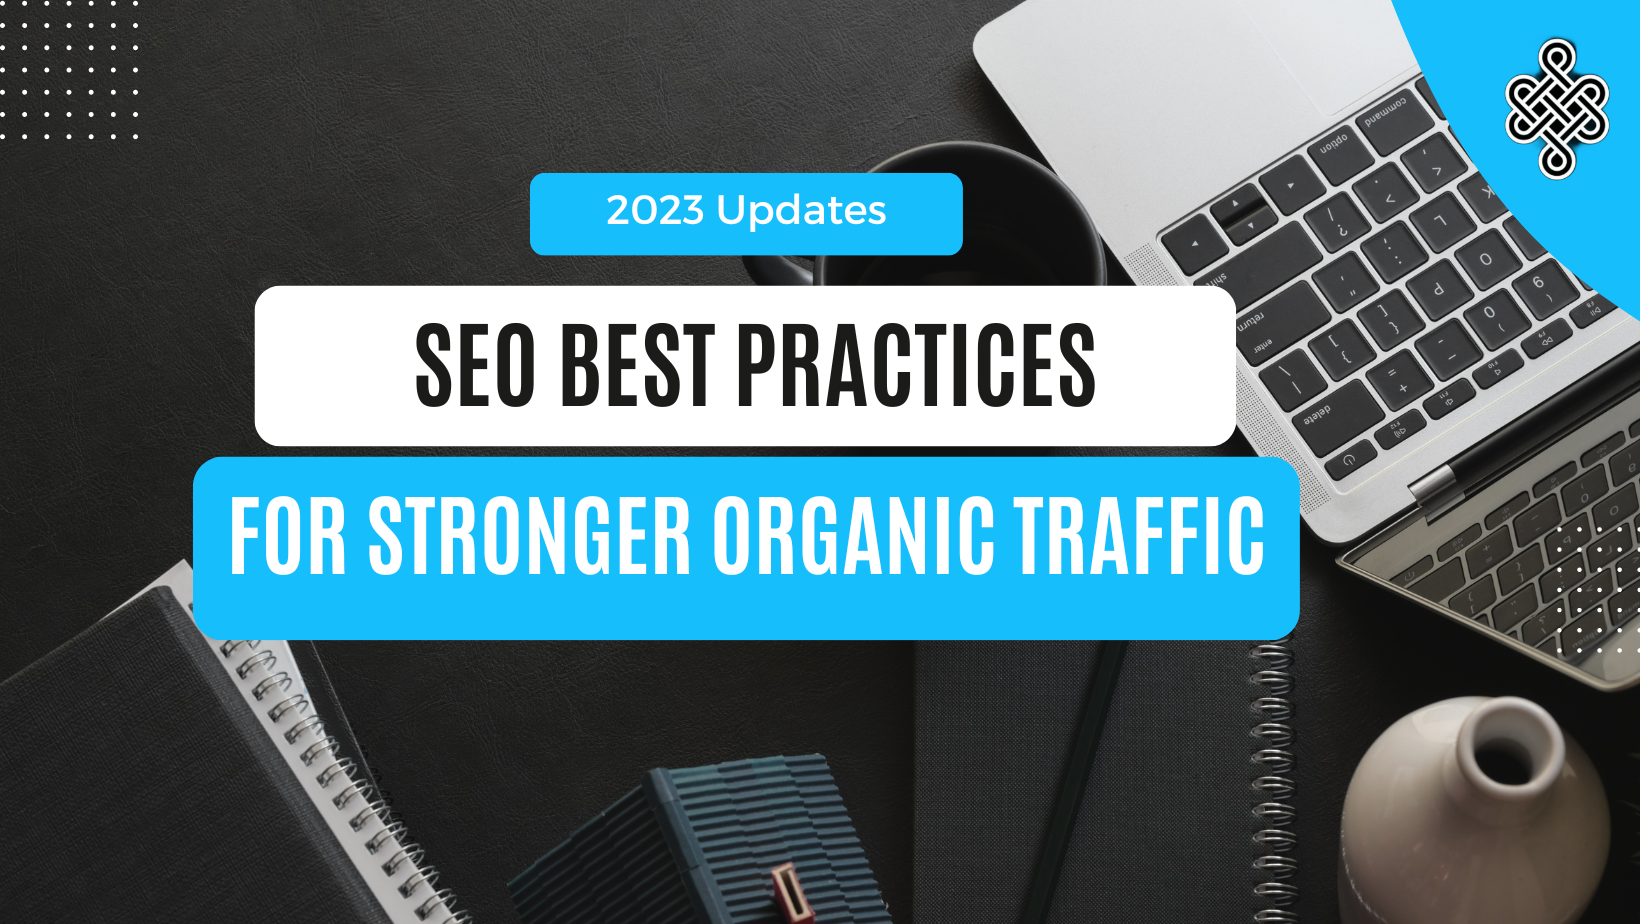 SEO Best Practices for Stronger Organic Traffic in 2023